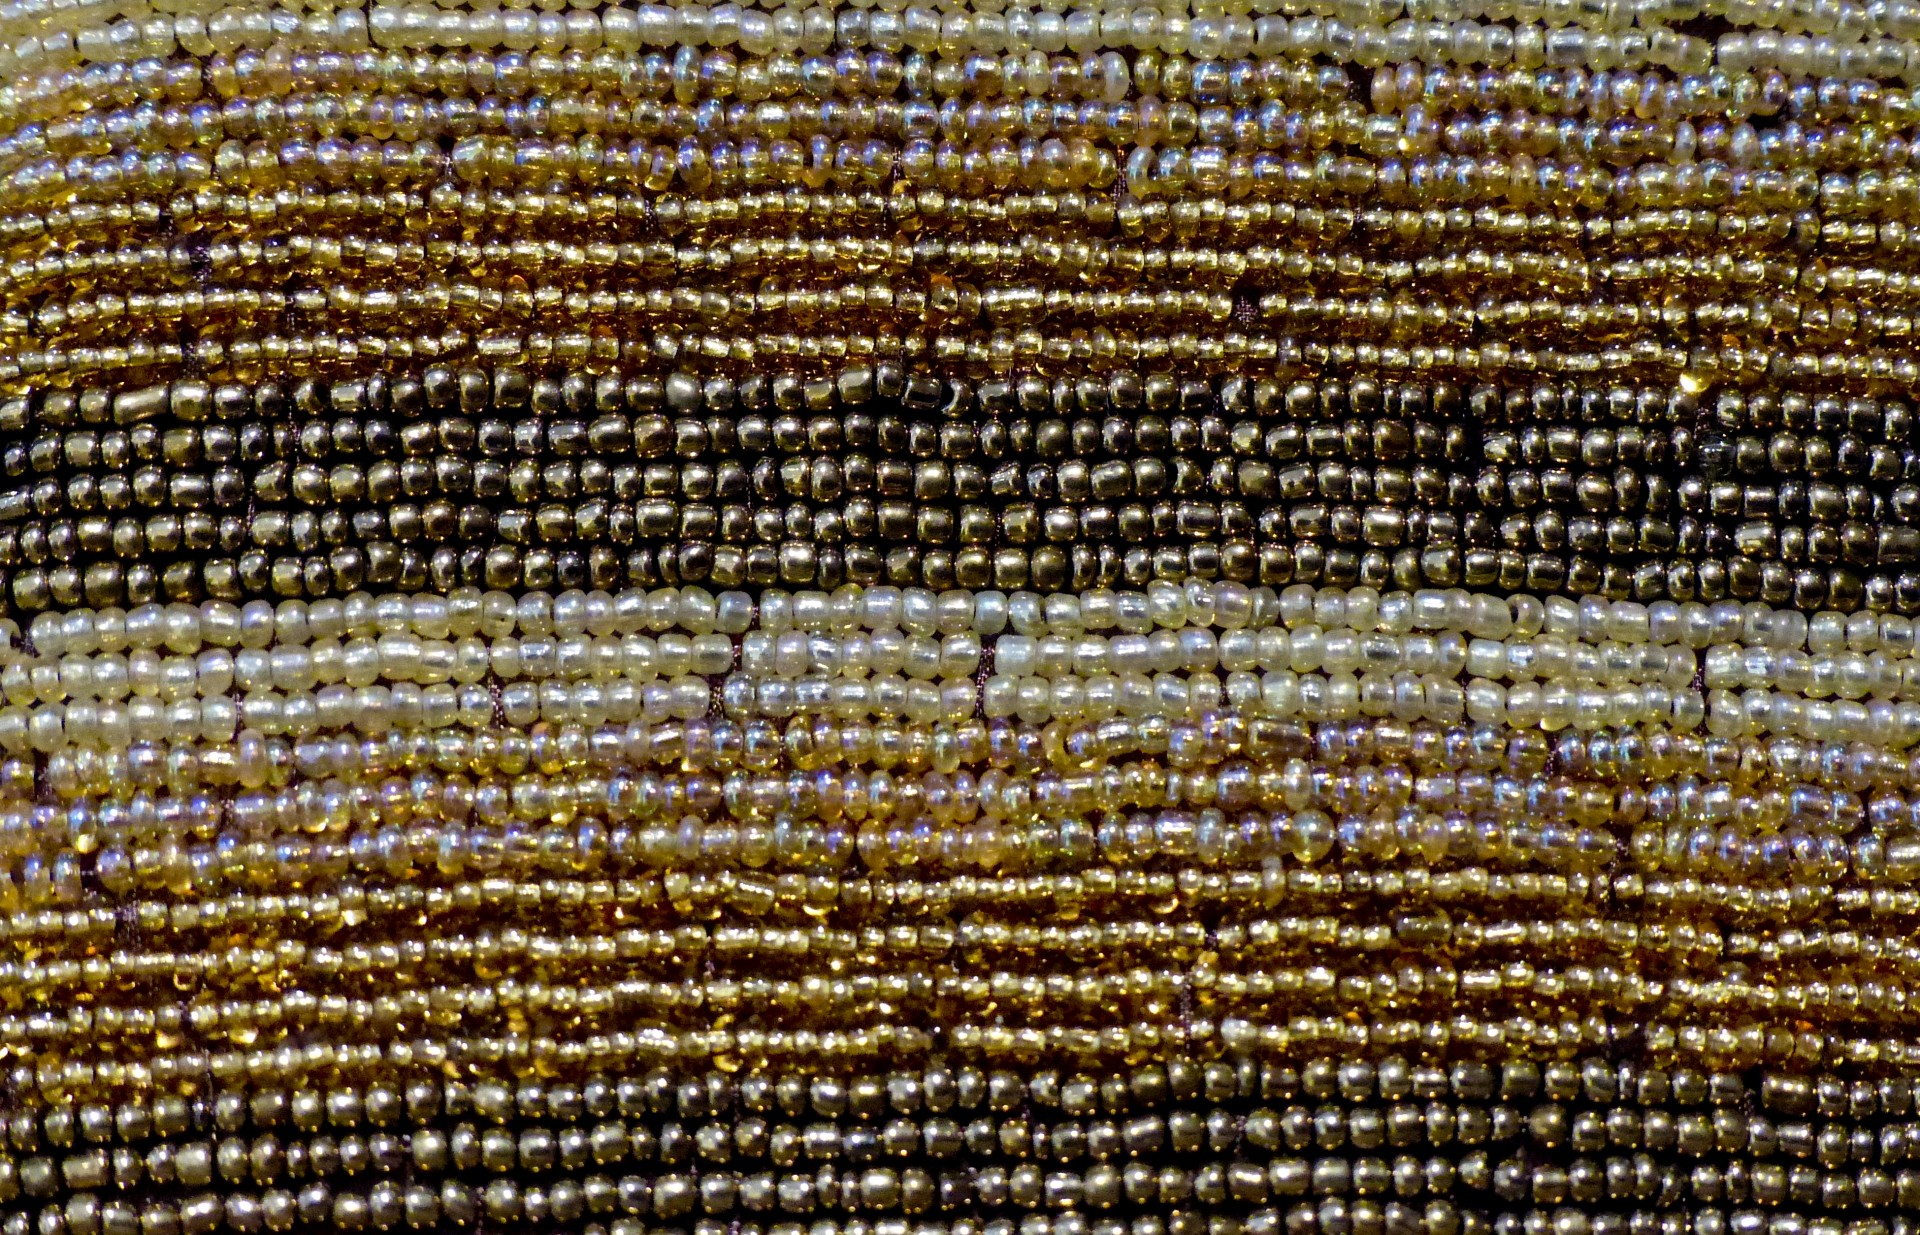 Gold Seed Bead Texture